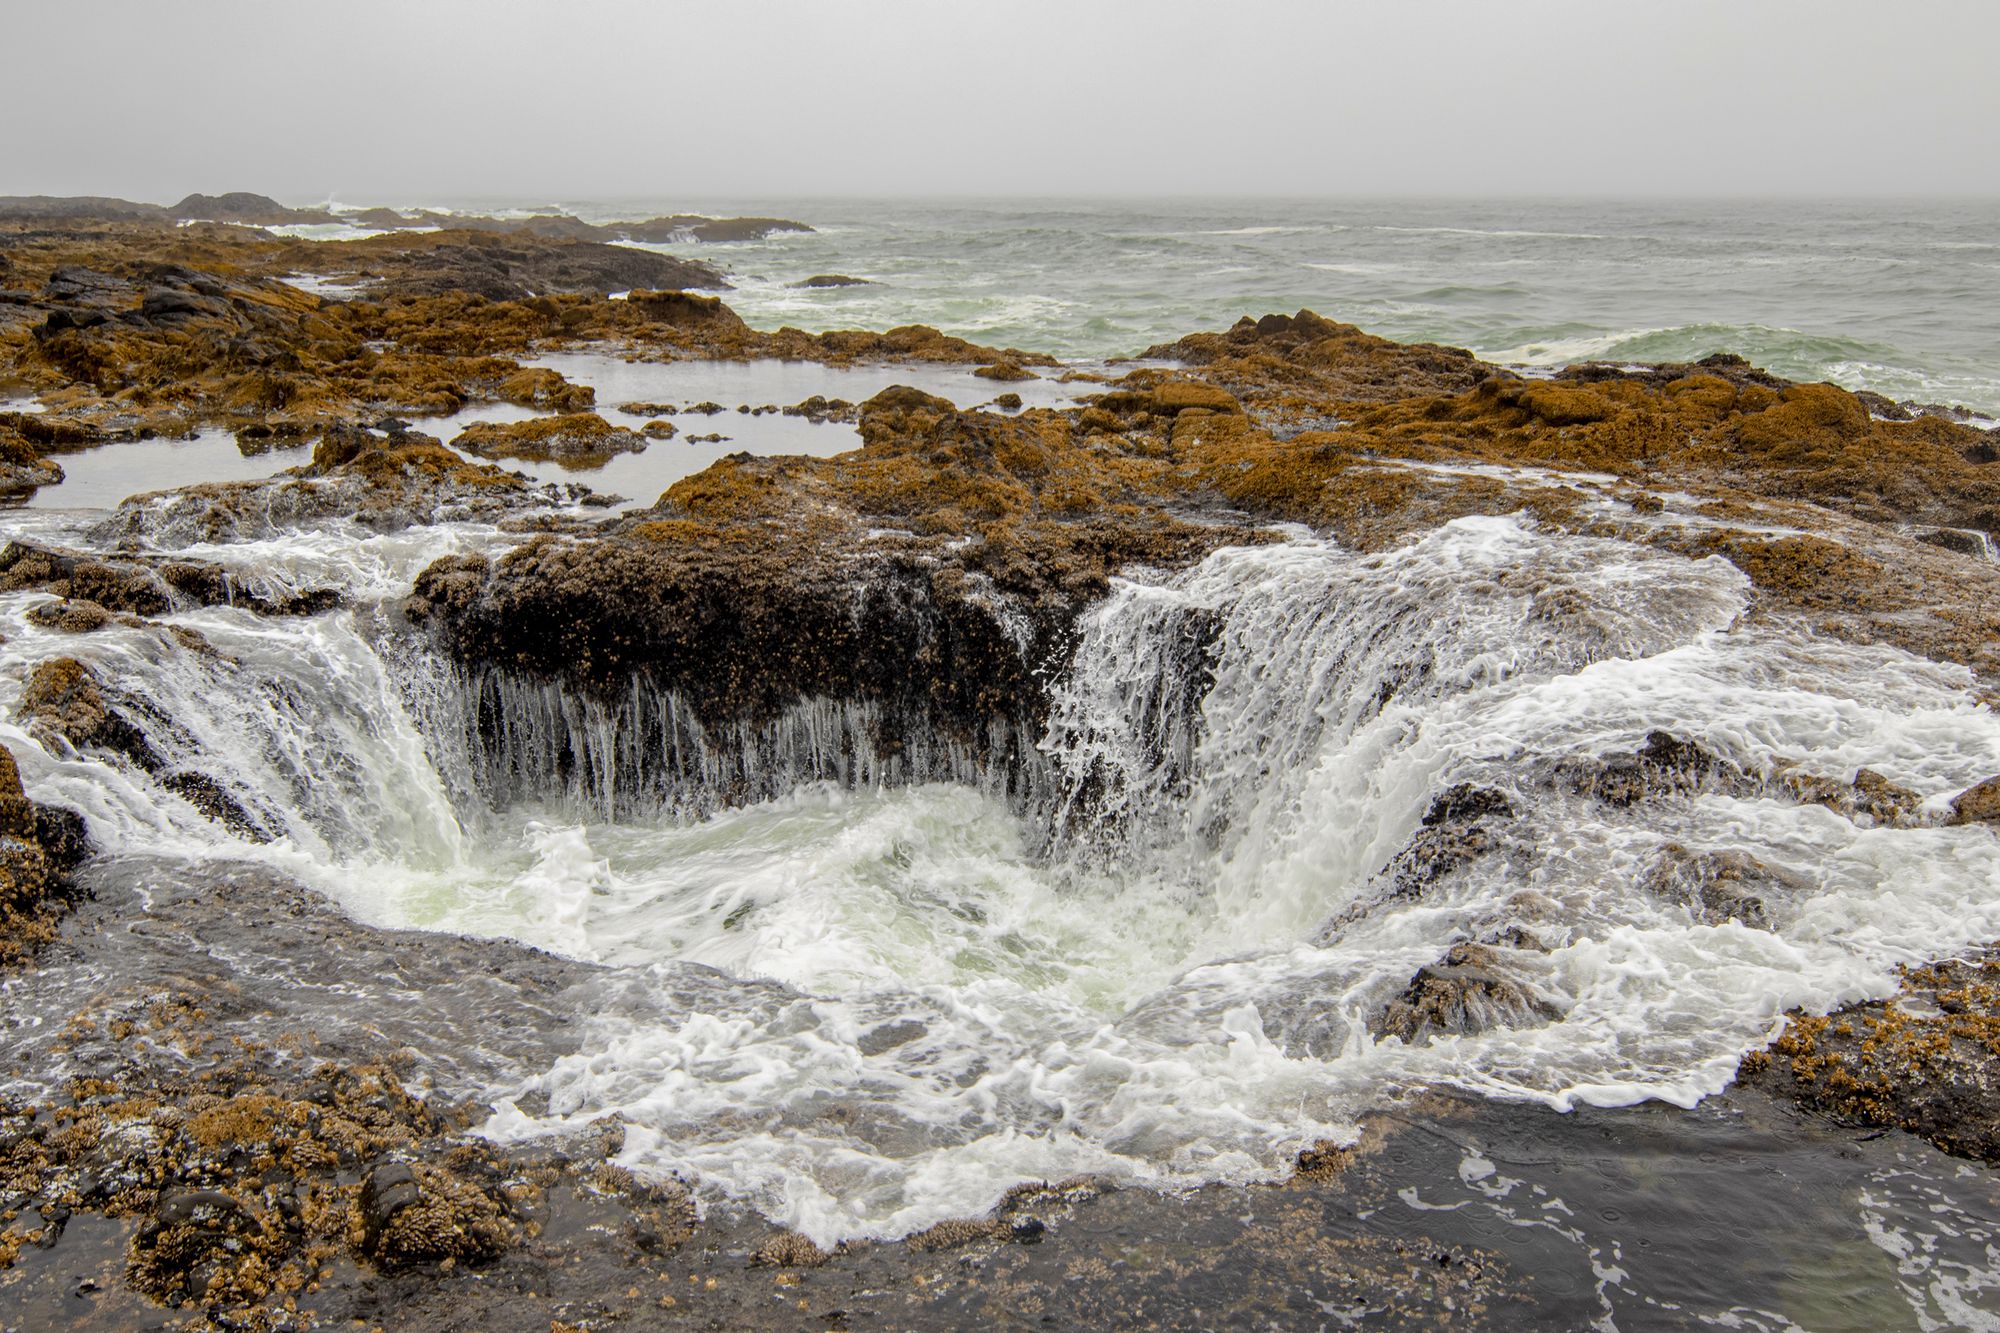 <p><b>Average Summer Temperature:</b> 60–70°F  (15.5–21°C)</p><p>Located on the edge of the Oregon Coast near Cape Perpetua, Thor's Well is a spectacular natural saltwater fountain and a refreshing escape from the summer inferno.</p><p><a href="https://www.yachatsoregon.org/295/Thors-Well#:~:text=The%20site%20is%20most%20spectacular,how%20the%20formation%20fills%20up.">Thor’s Well</a> is best viewed at high tide or during stormy weather, when waves crash into the hole, creating dramatic water spouts. For the best experience, plan your visit around the tidal schedule and always check weather conditions.</p><p><b>Tip: </b>Safety is crucial here — stay on the marked trails and keep a safe distance from the edge, as the area can be slippery and waves unpredictable. </p>